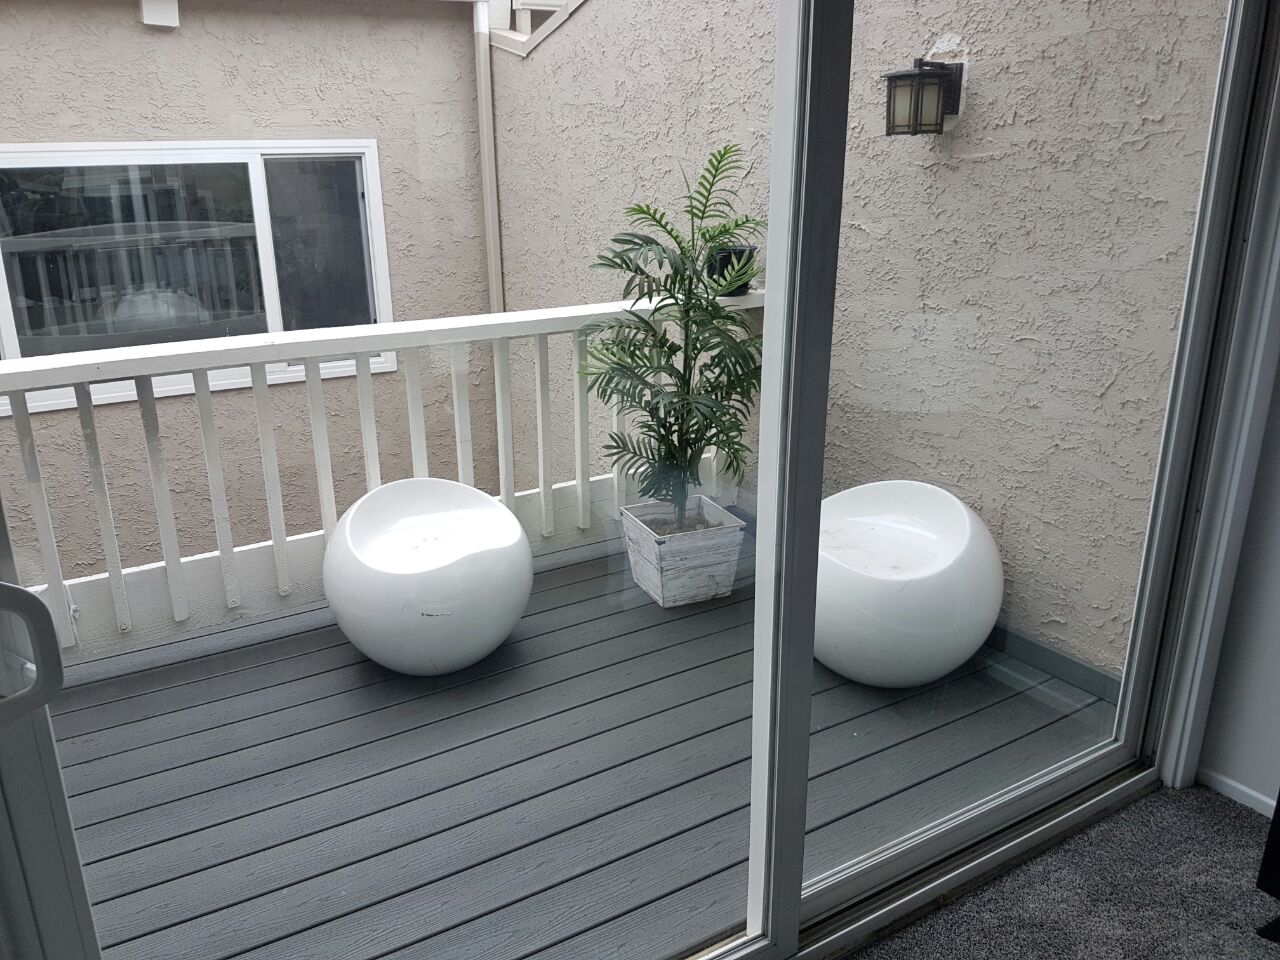 A balcony with two white chairs and potted plant.